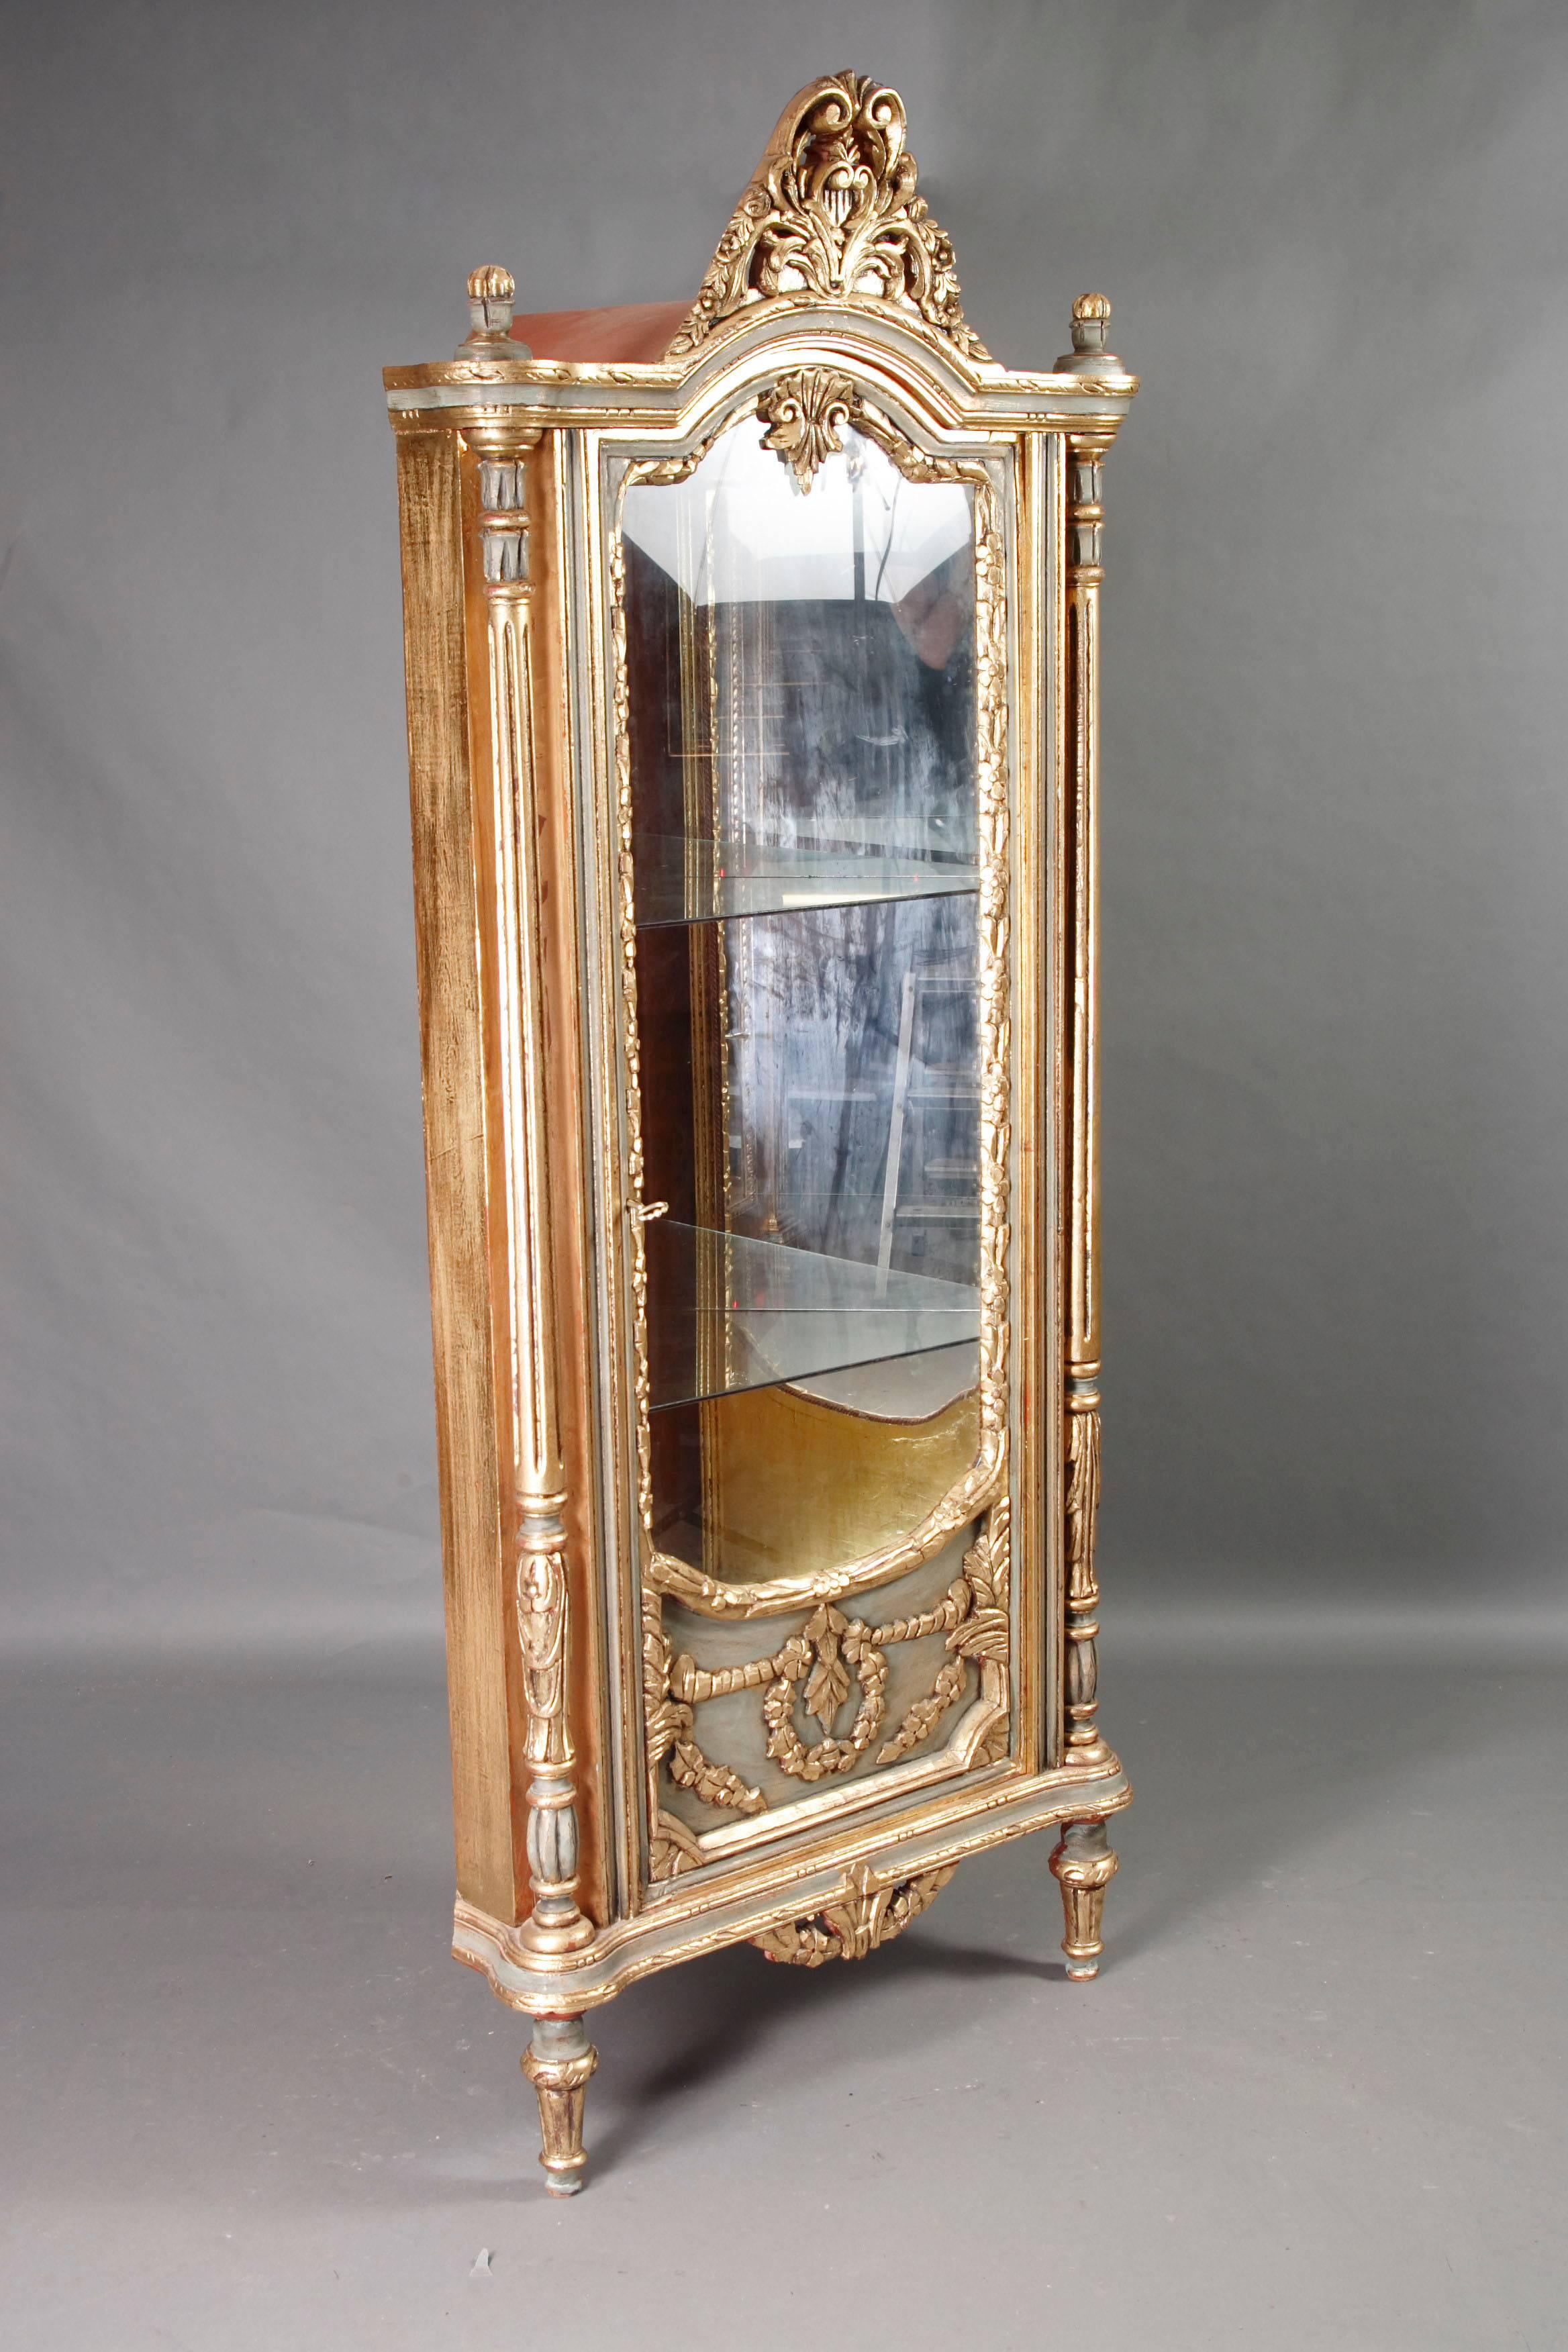 Solid beechwood, carved, colored and polished gold-plated. High-right corpus on conical furled legs. Three-quarter glazed door, flanked by carved full columns.
Ornately carved crown. Two glassy floors, rear wall mirrored.
 